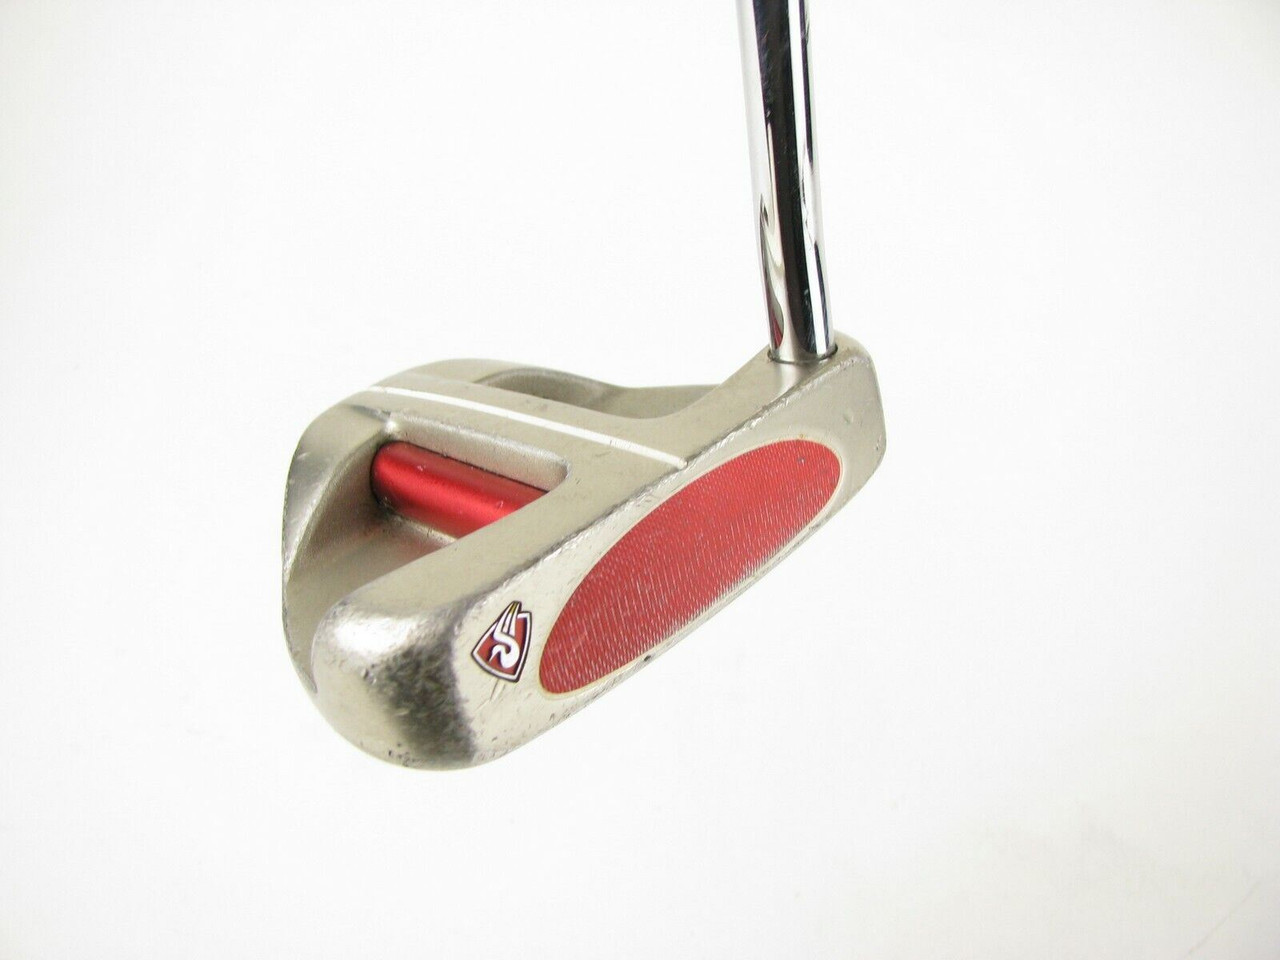 TaylorMade Rossa Mezza Monza Putter 32 inches - Clubs n Covers Golf